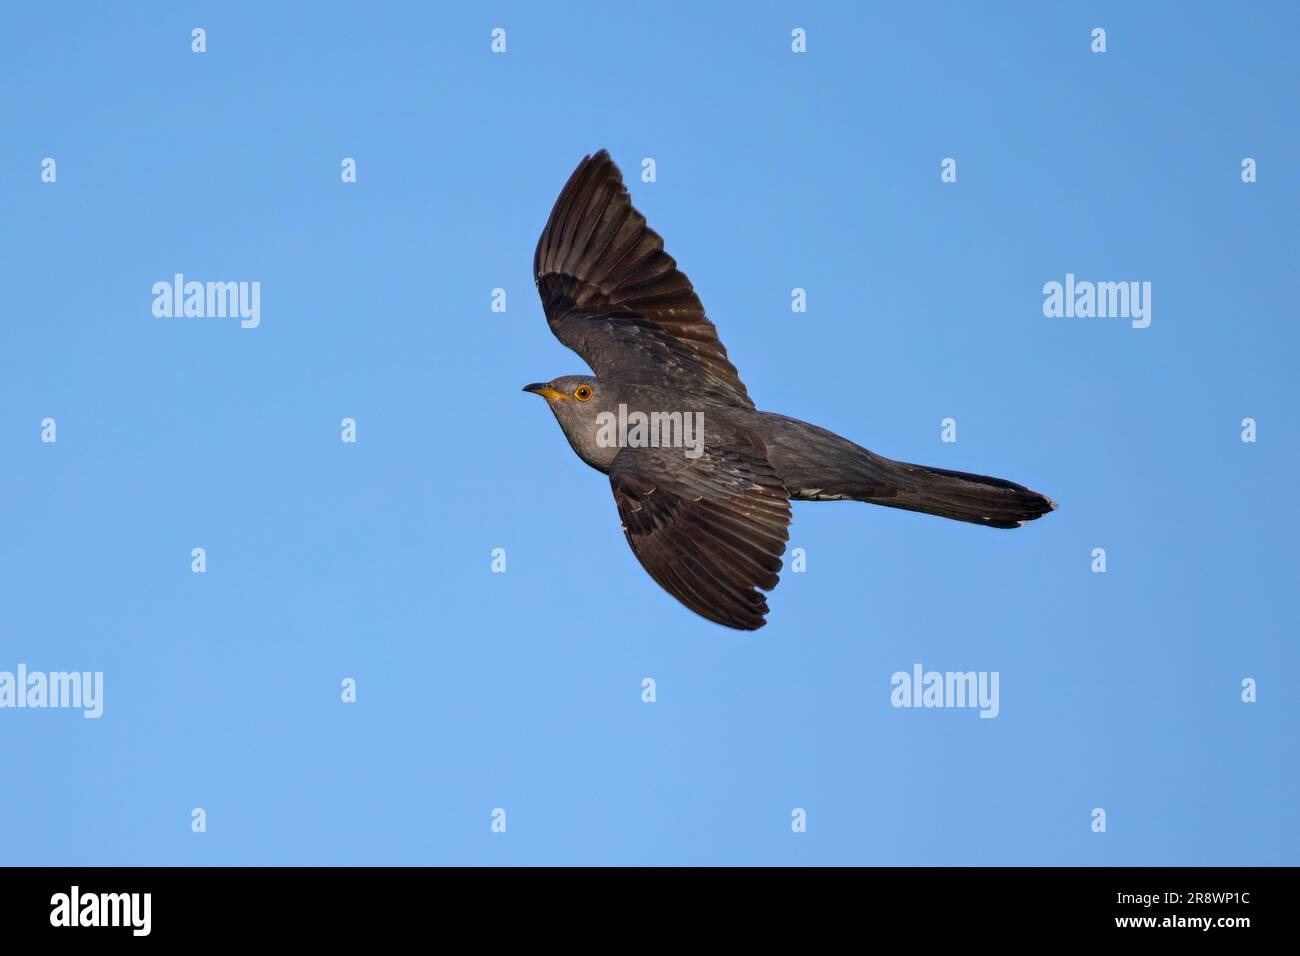 Common cuckoo (Cuculus canorus) in its natural environment Stock Photo